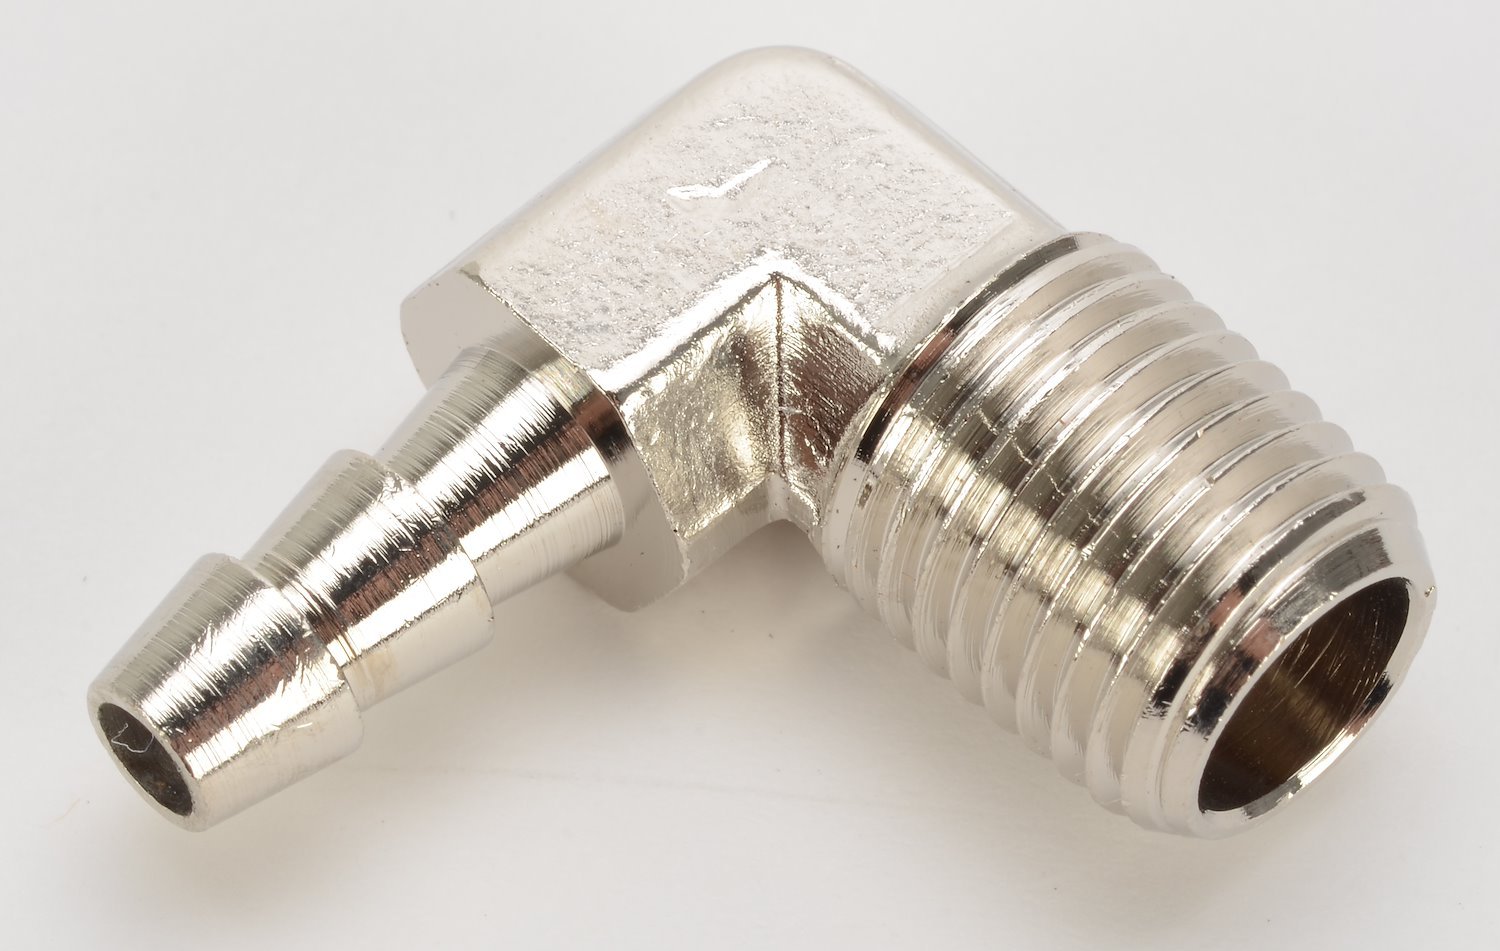 NPT 90-Degree Hose Barb Fitting [1/4 in. NPT to 1/4 in. Hose, Nickel-Plated Brass]